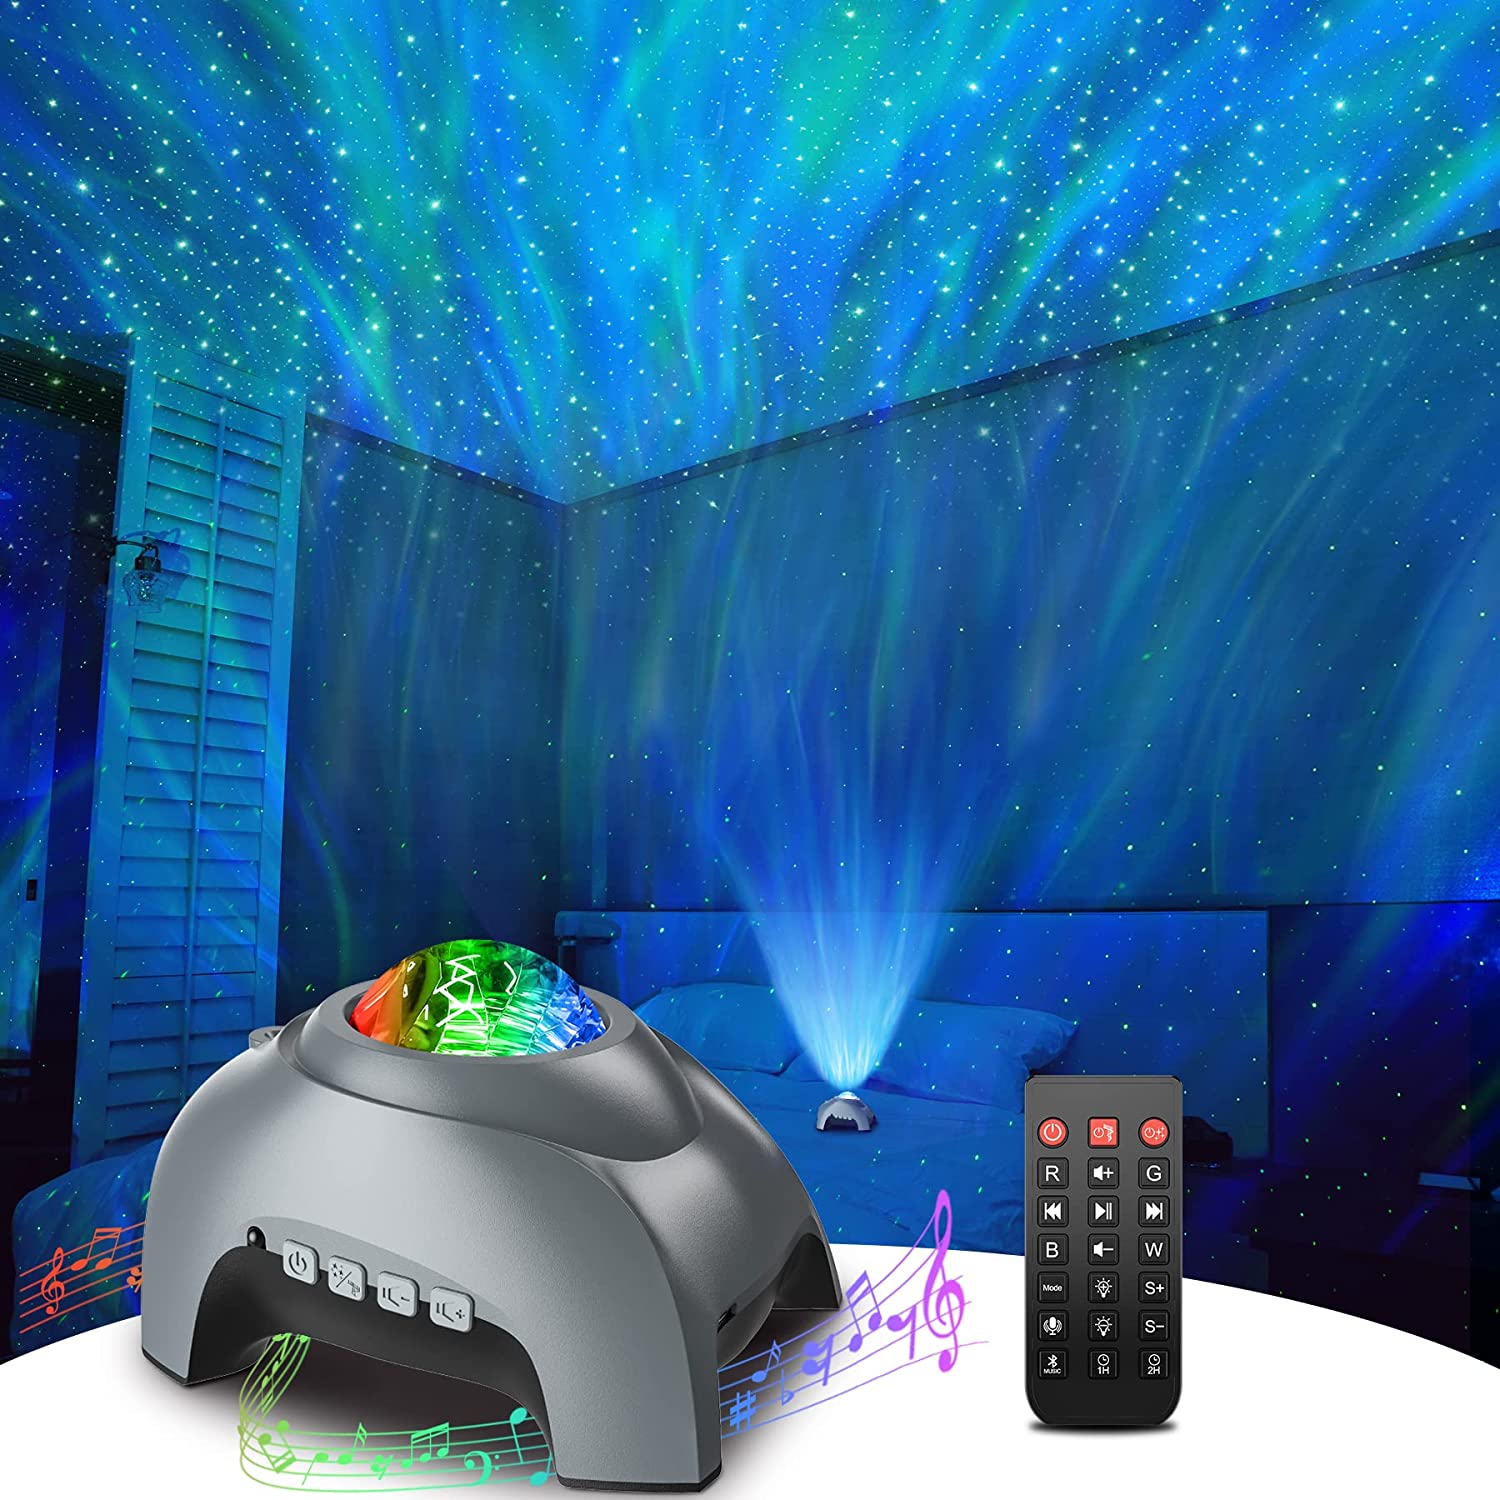 Home Star Projector with Remote Control | Yedwo Home